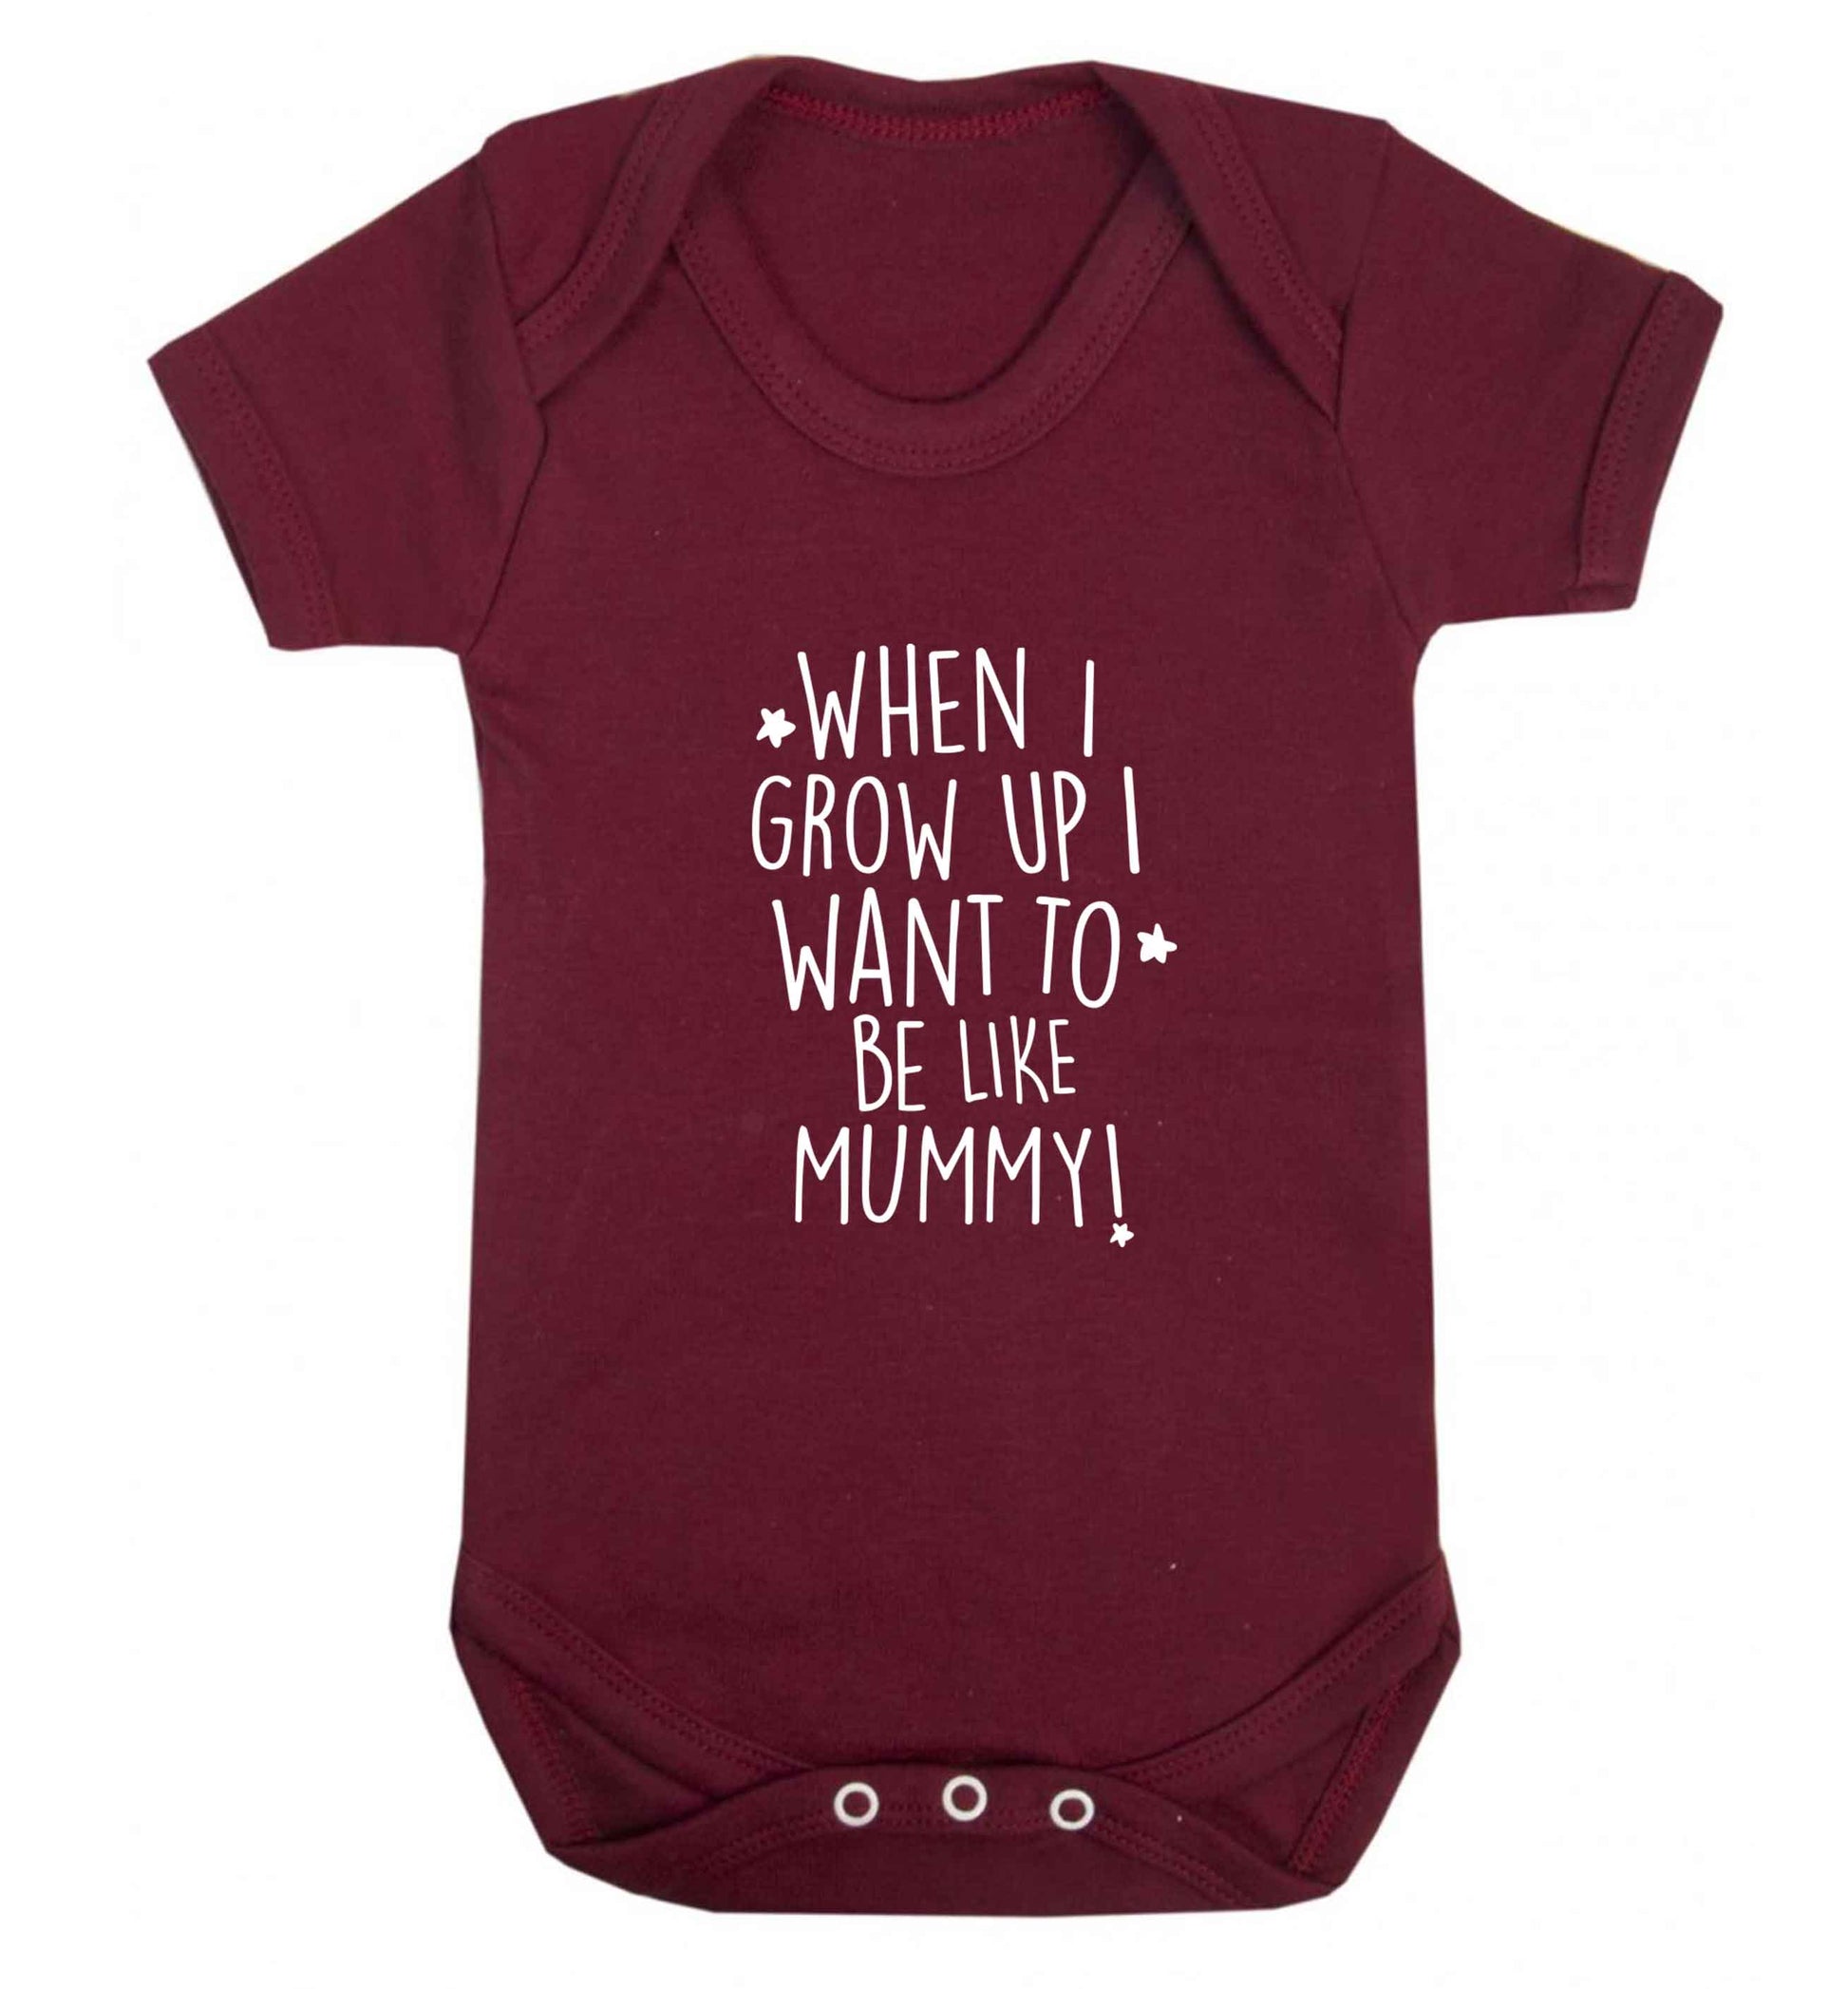 When I grow up I want to be like my mummy baby vest maroon 18-24 months